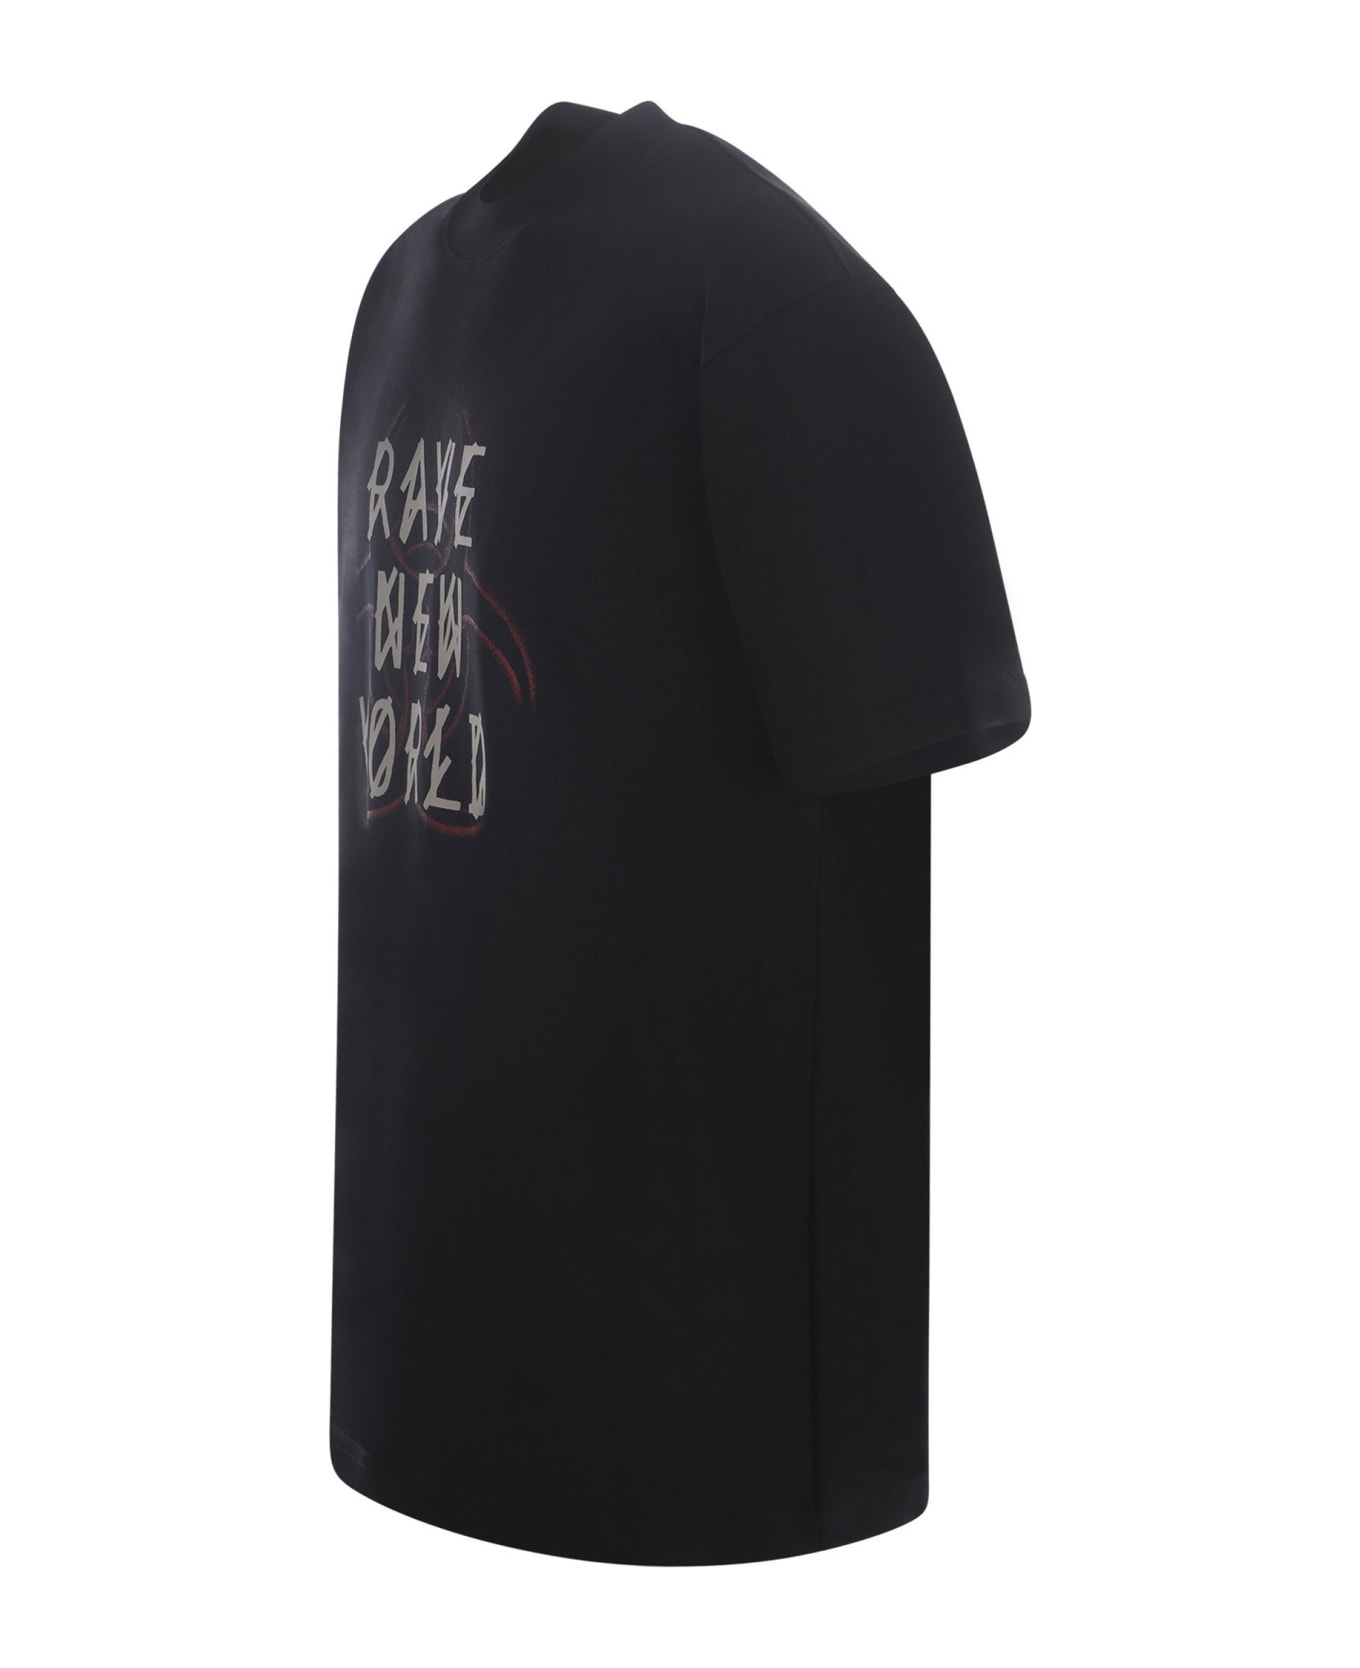 44 Label Group T-shirt 44label Group In Cotton - Nero シャツ